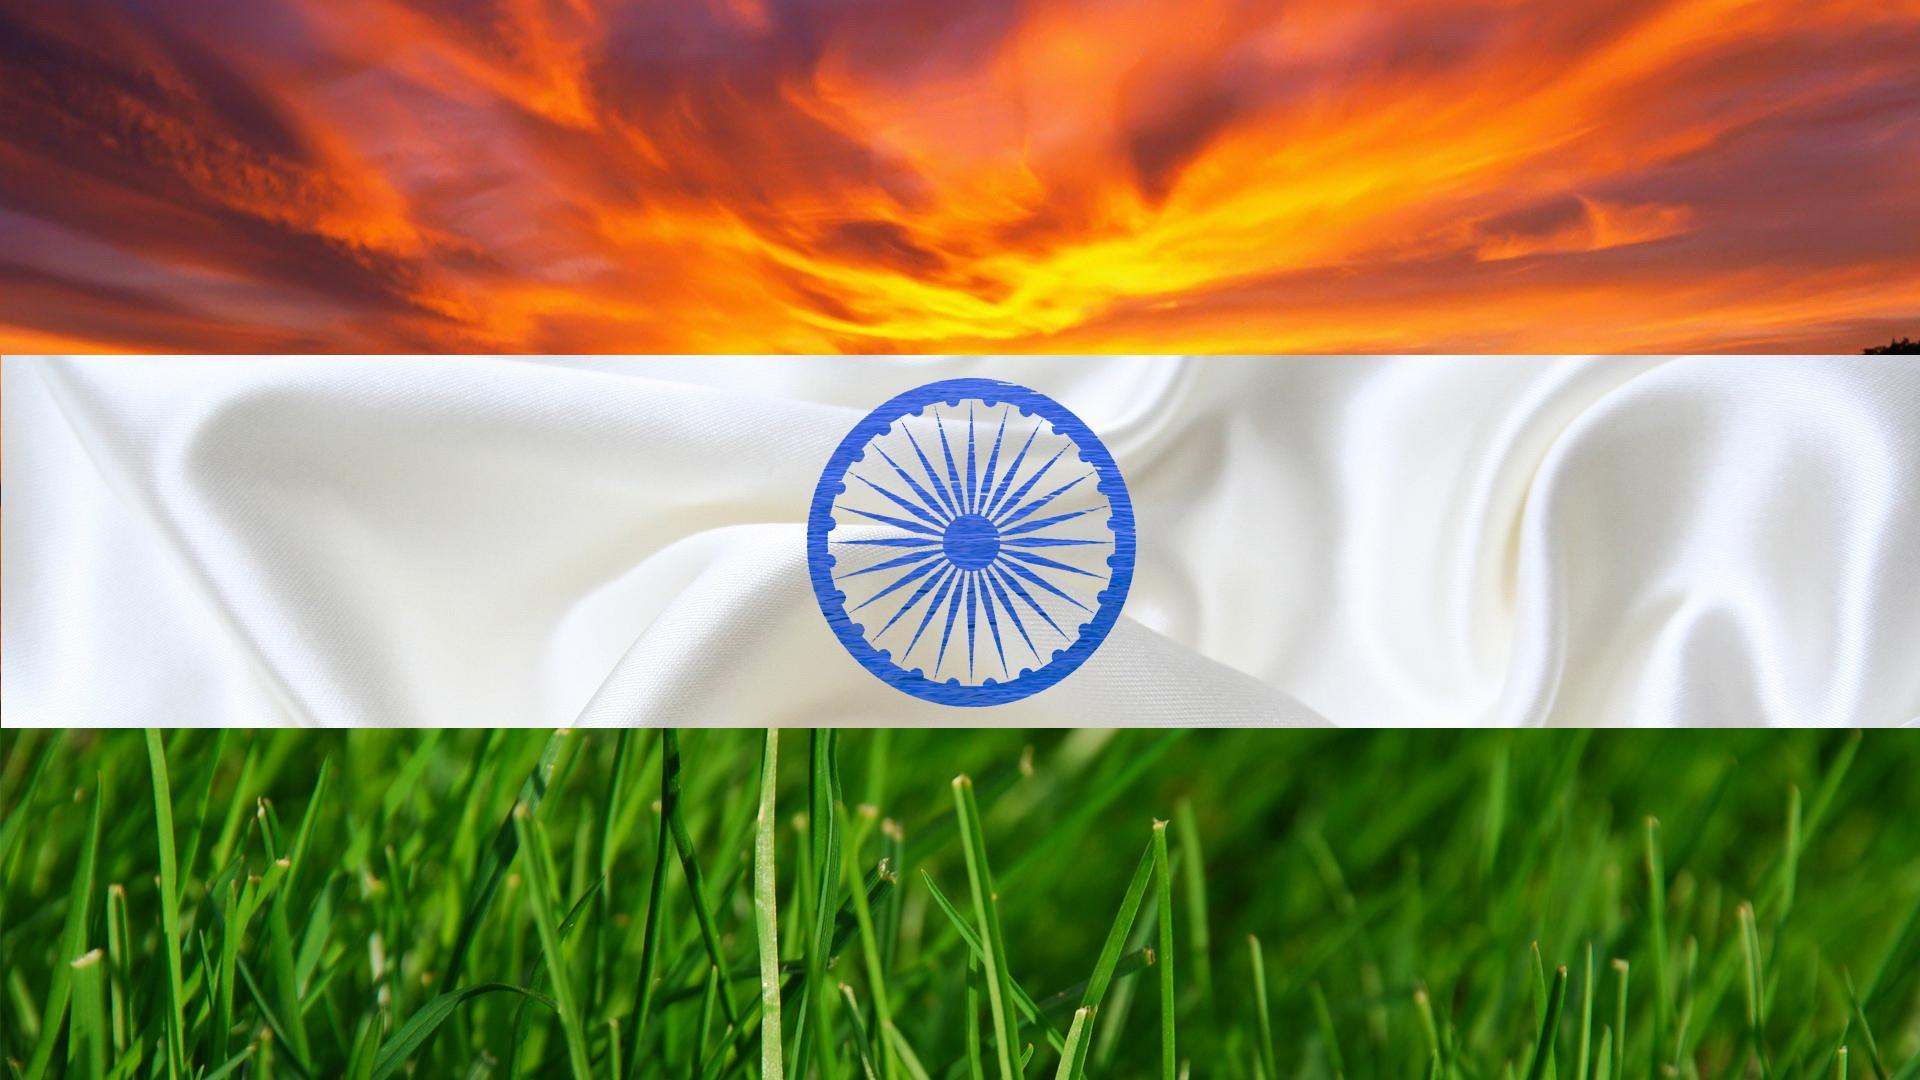 India Flag Wallpapers